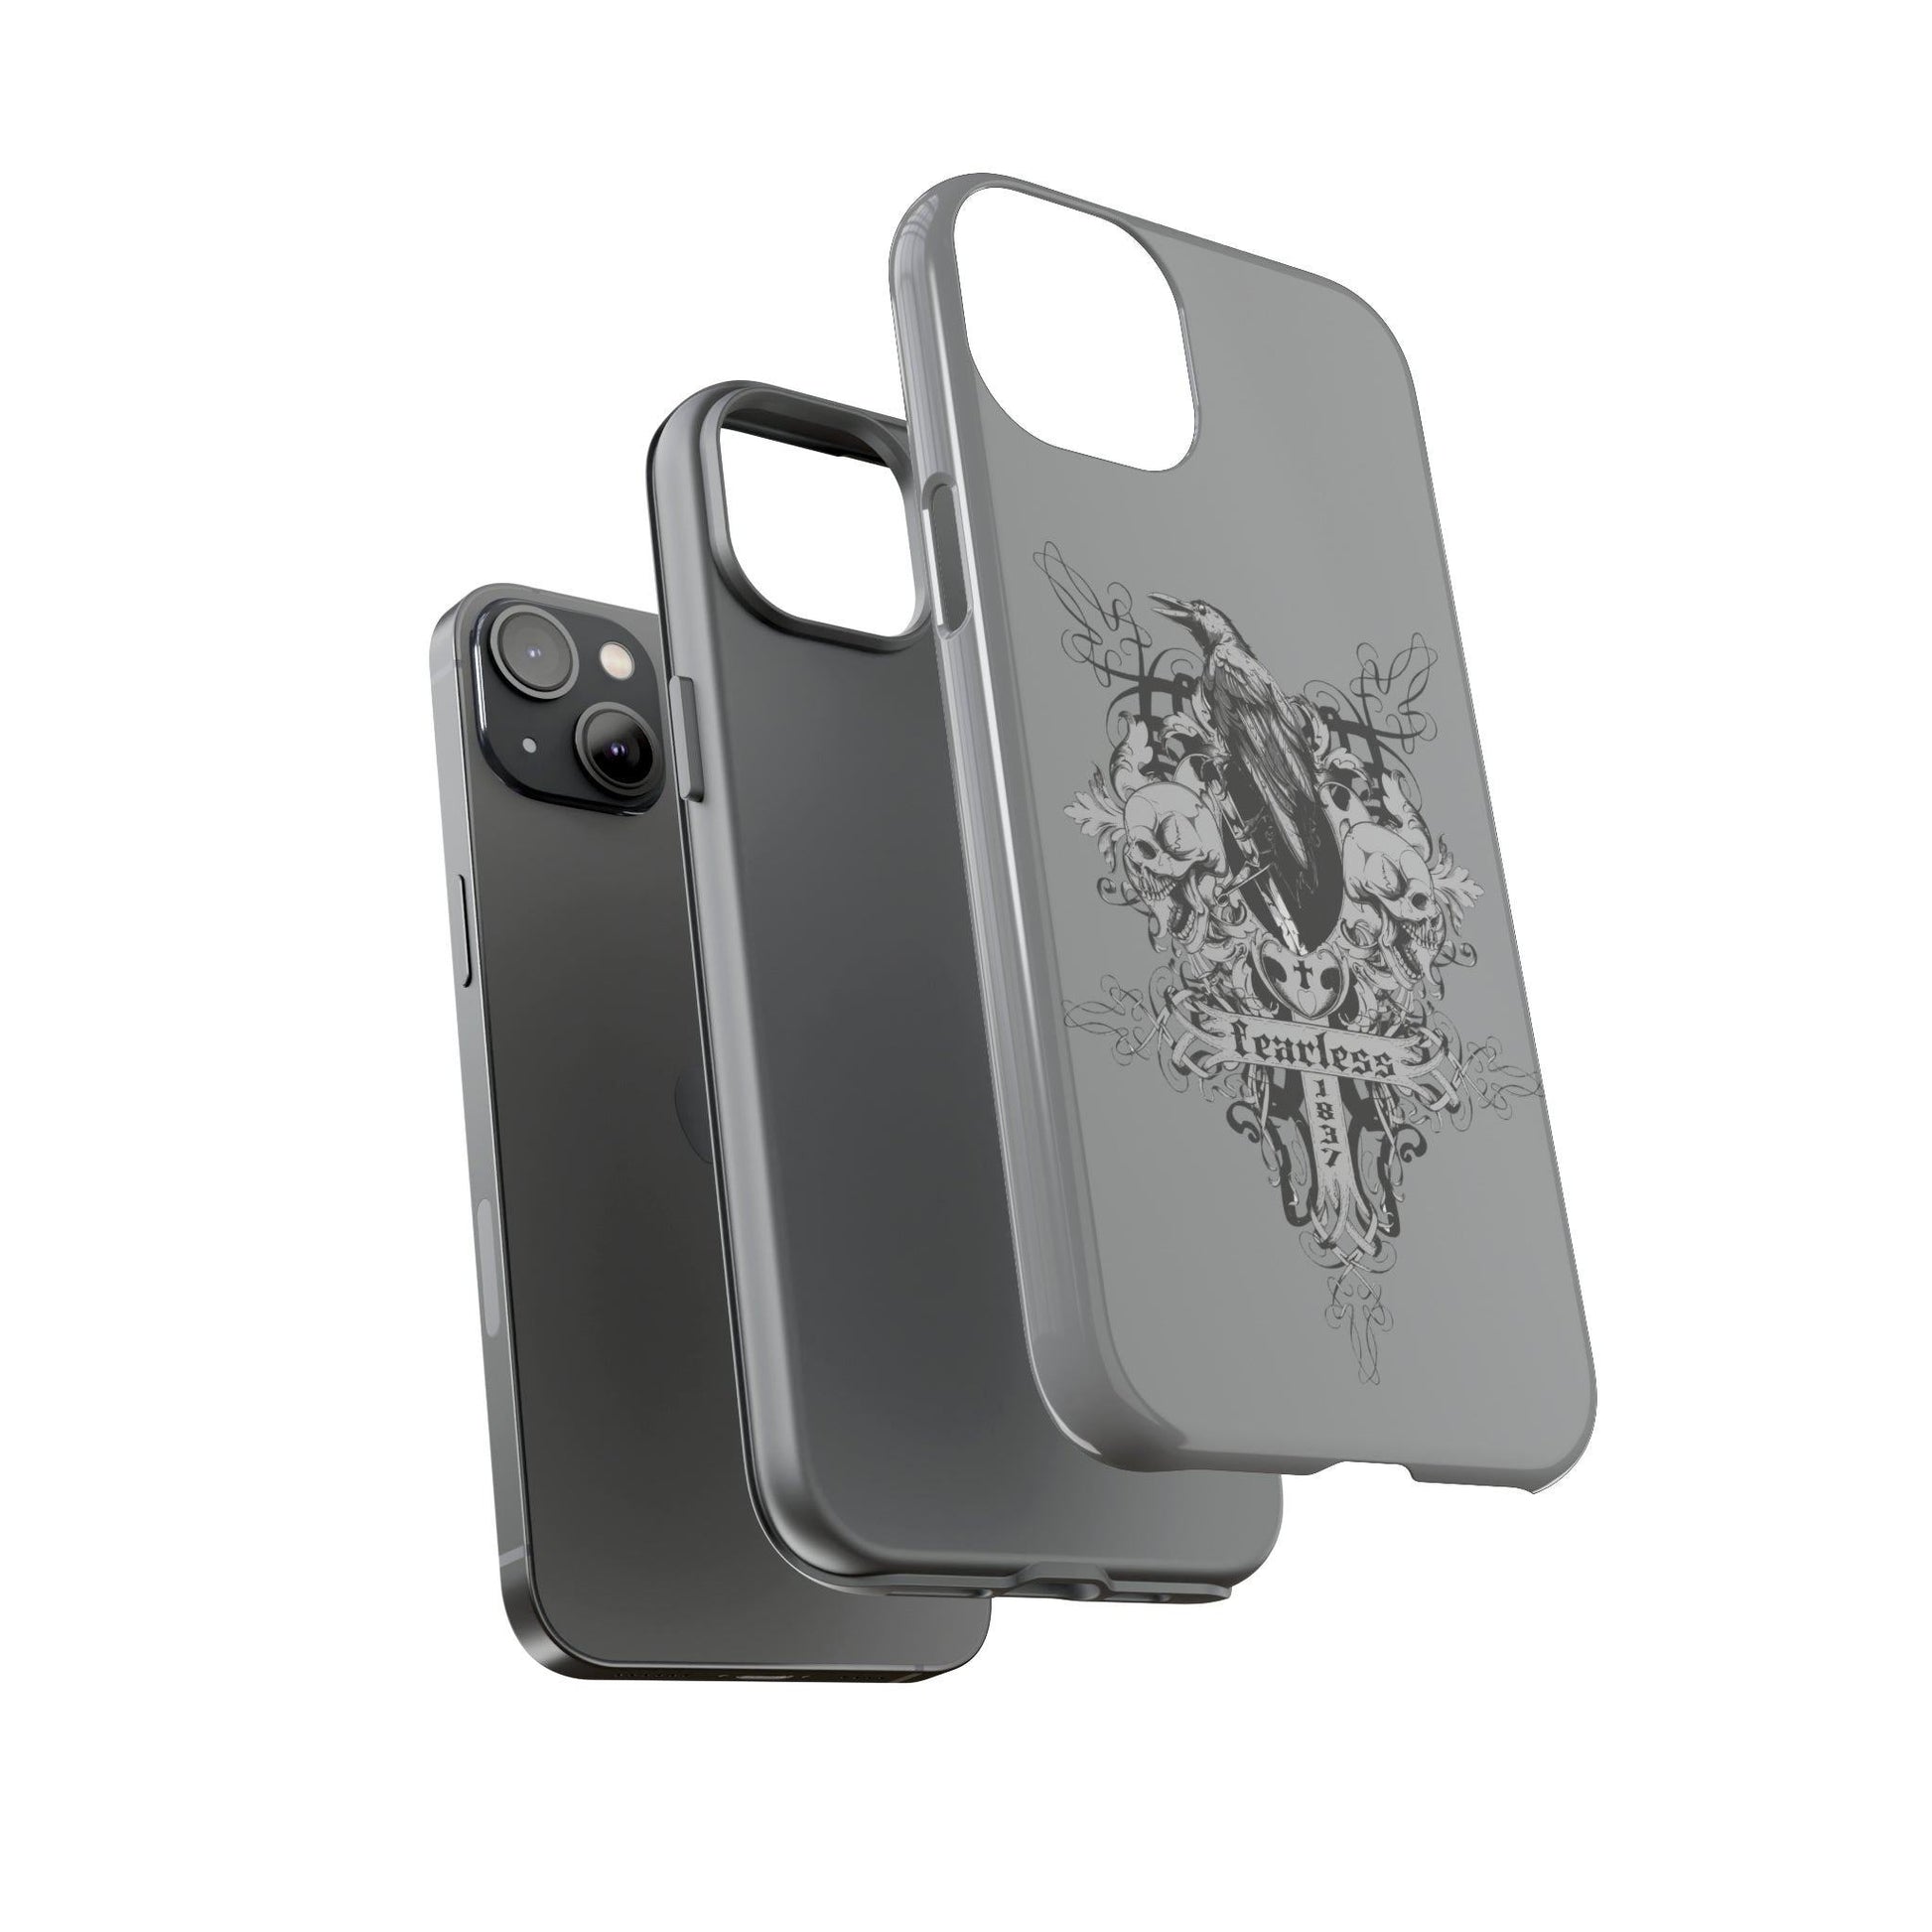 Apple Iphone Fearless Cover -- Apple Iphone Fearless Cover - undefined Phone Case | JLR Design